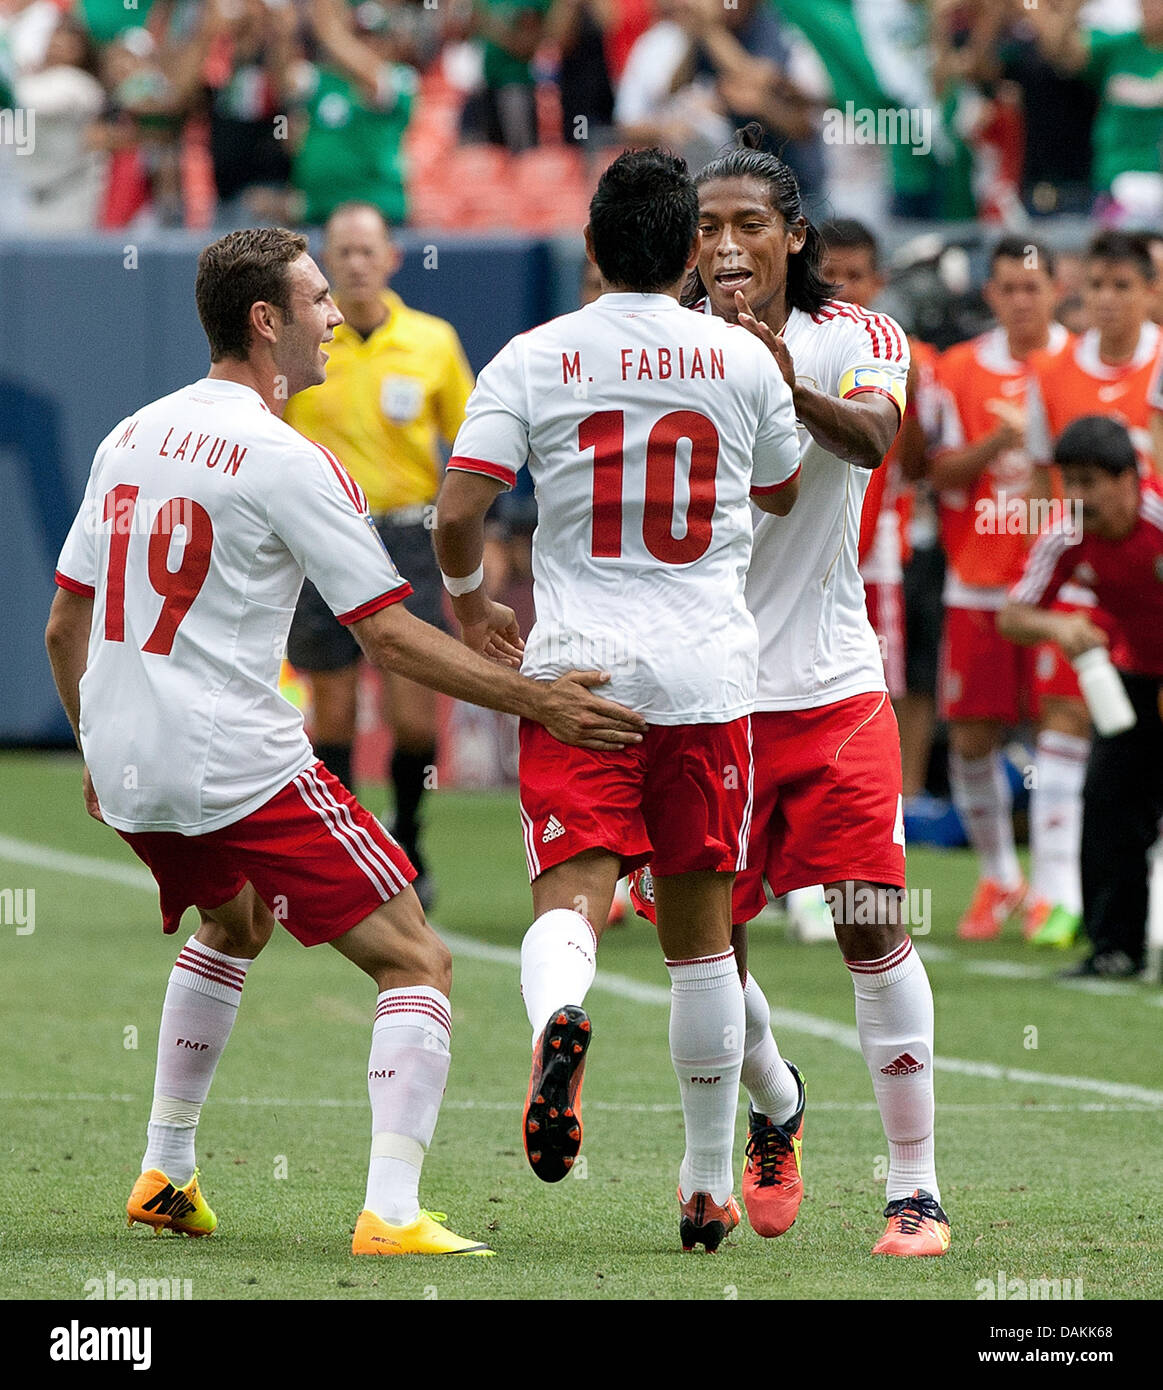 July 14, 2013 - Denver, Colorado, U.S - Mexico's MARCO FABIAN, center, gets congrats from team mates after scoring the 1st. goal of the game for his team during the 1st. half at Sports Authority Field at Mile High Sunday afternoon. Mexico defeats Martinique 3-1. (Credit Image: © Hector Acevedo/ZUMAPRESS.com) Stock Photo